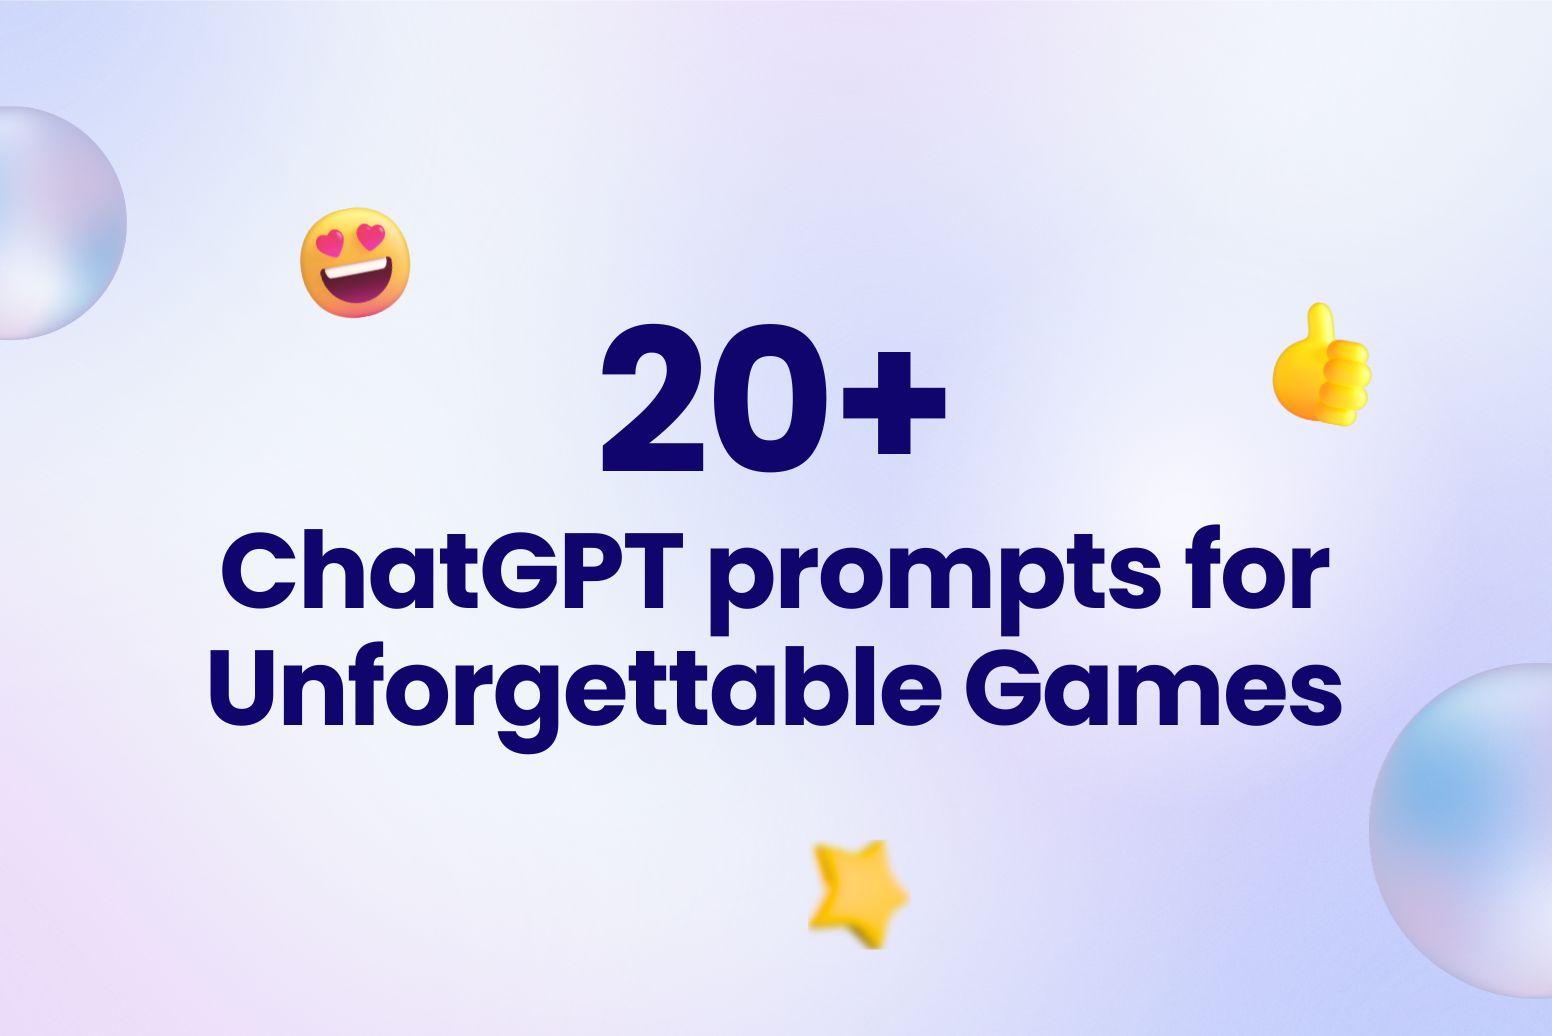 20+ ChatGPT prompts for Unforgettable Games